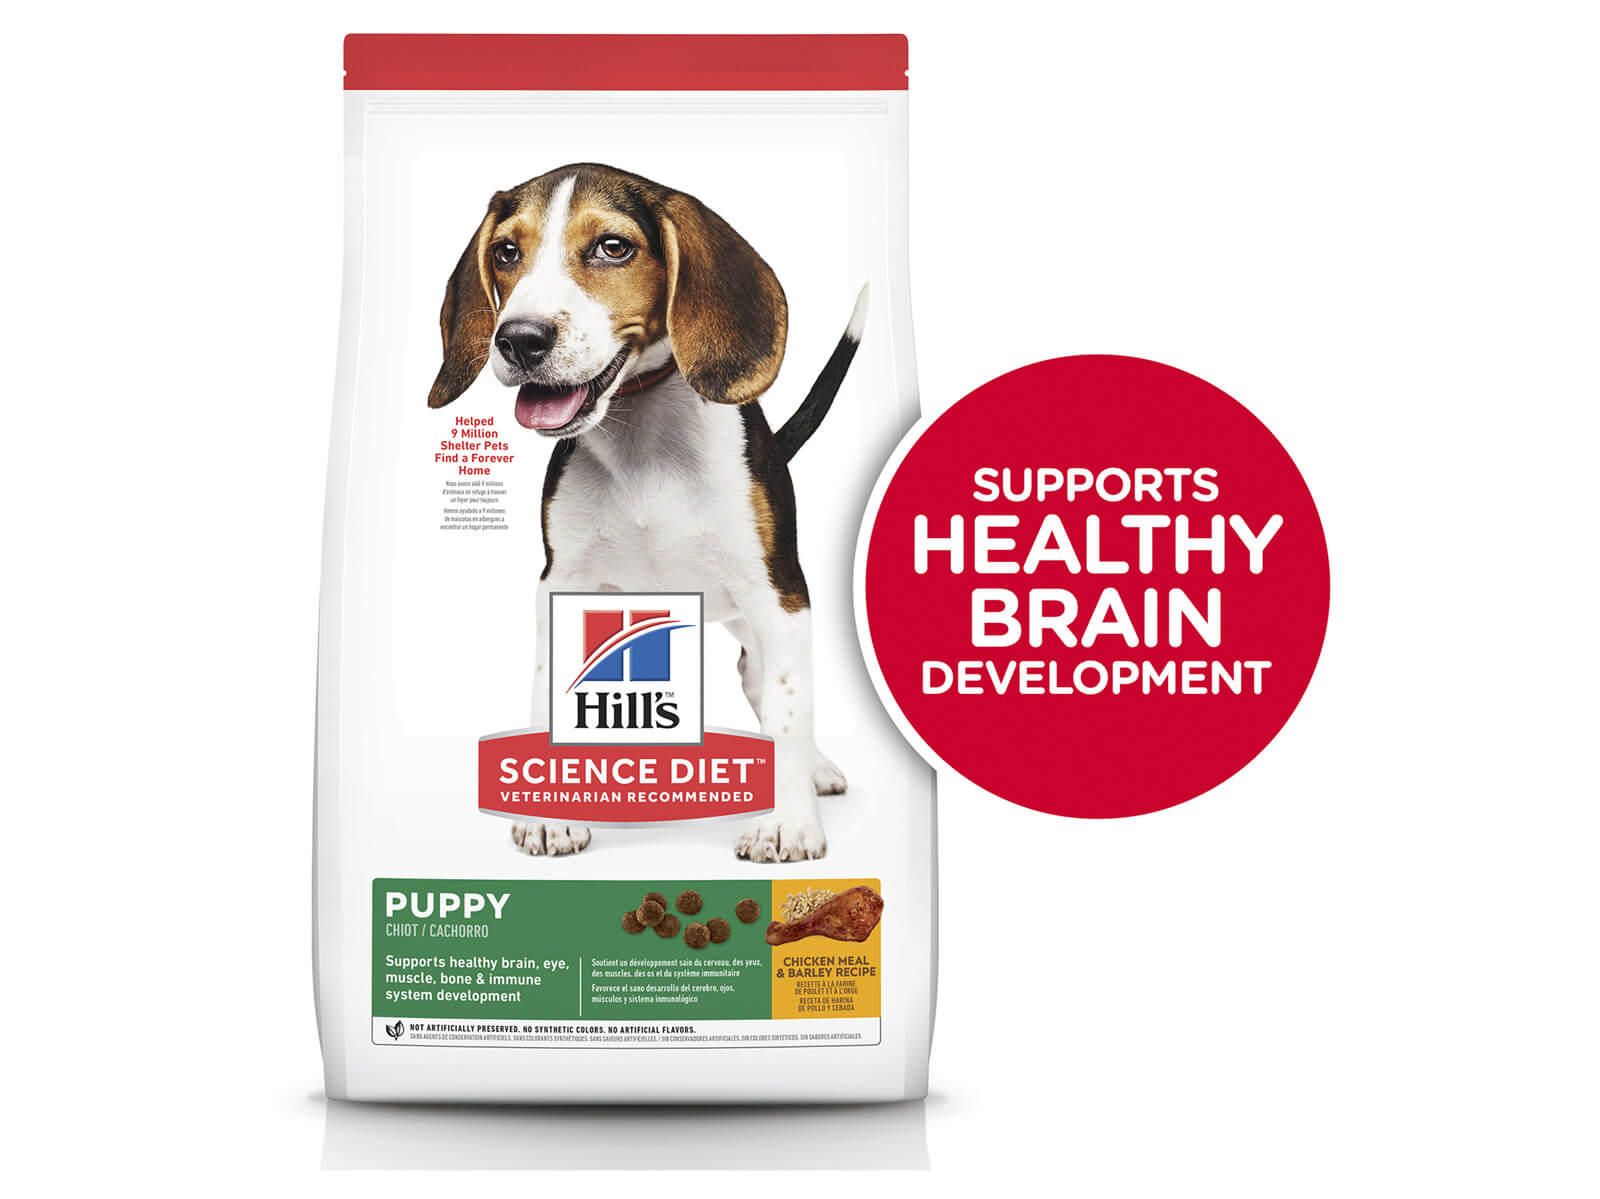 Where Is Science Diet Dog Food Made?